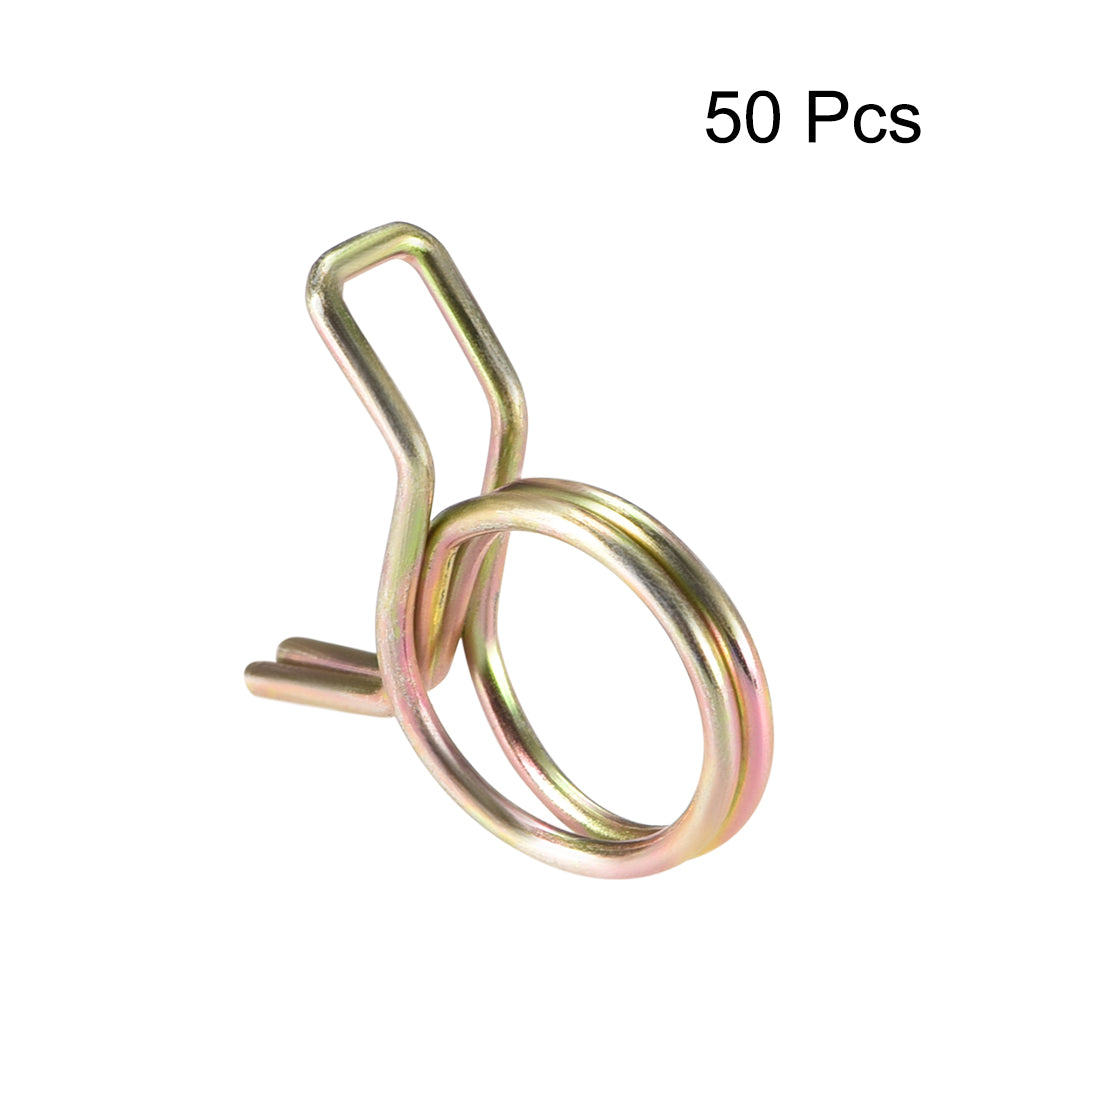 uxcell Uxcell Double Wire Spring Hose Clamp 11mm Fuel Line Tube Spring Clips,Color Zinc,50Pcs